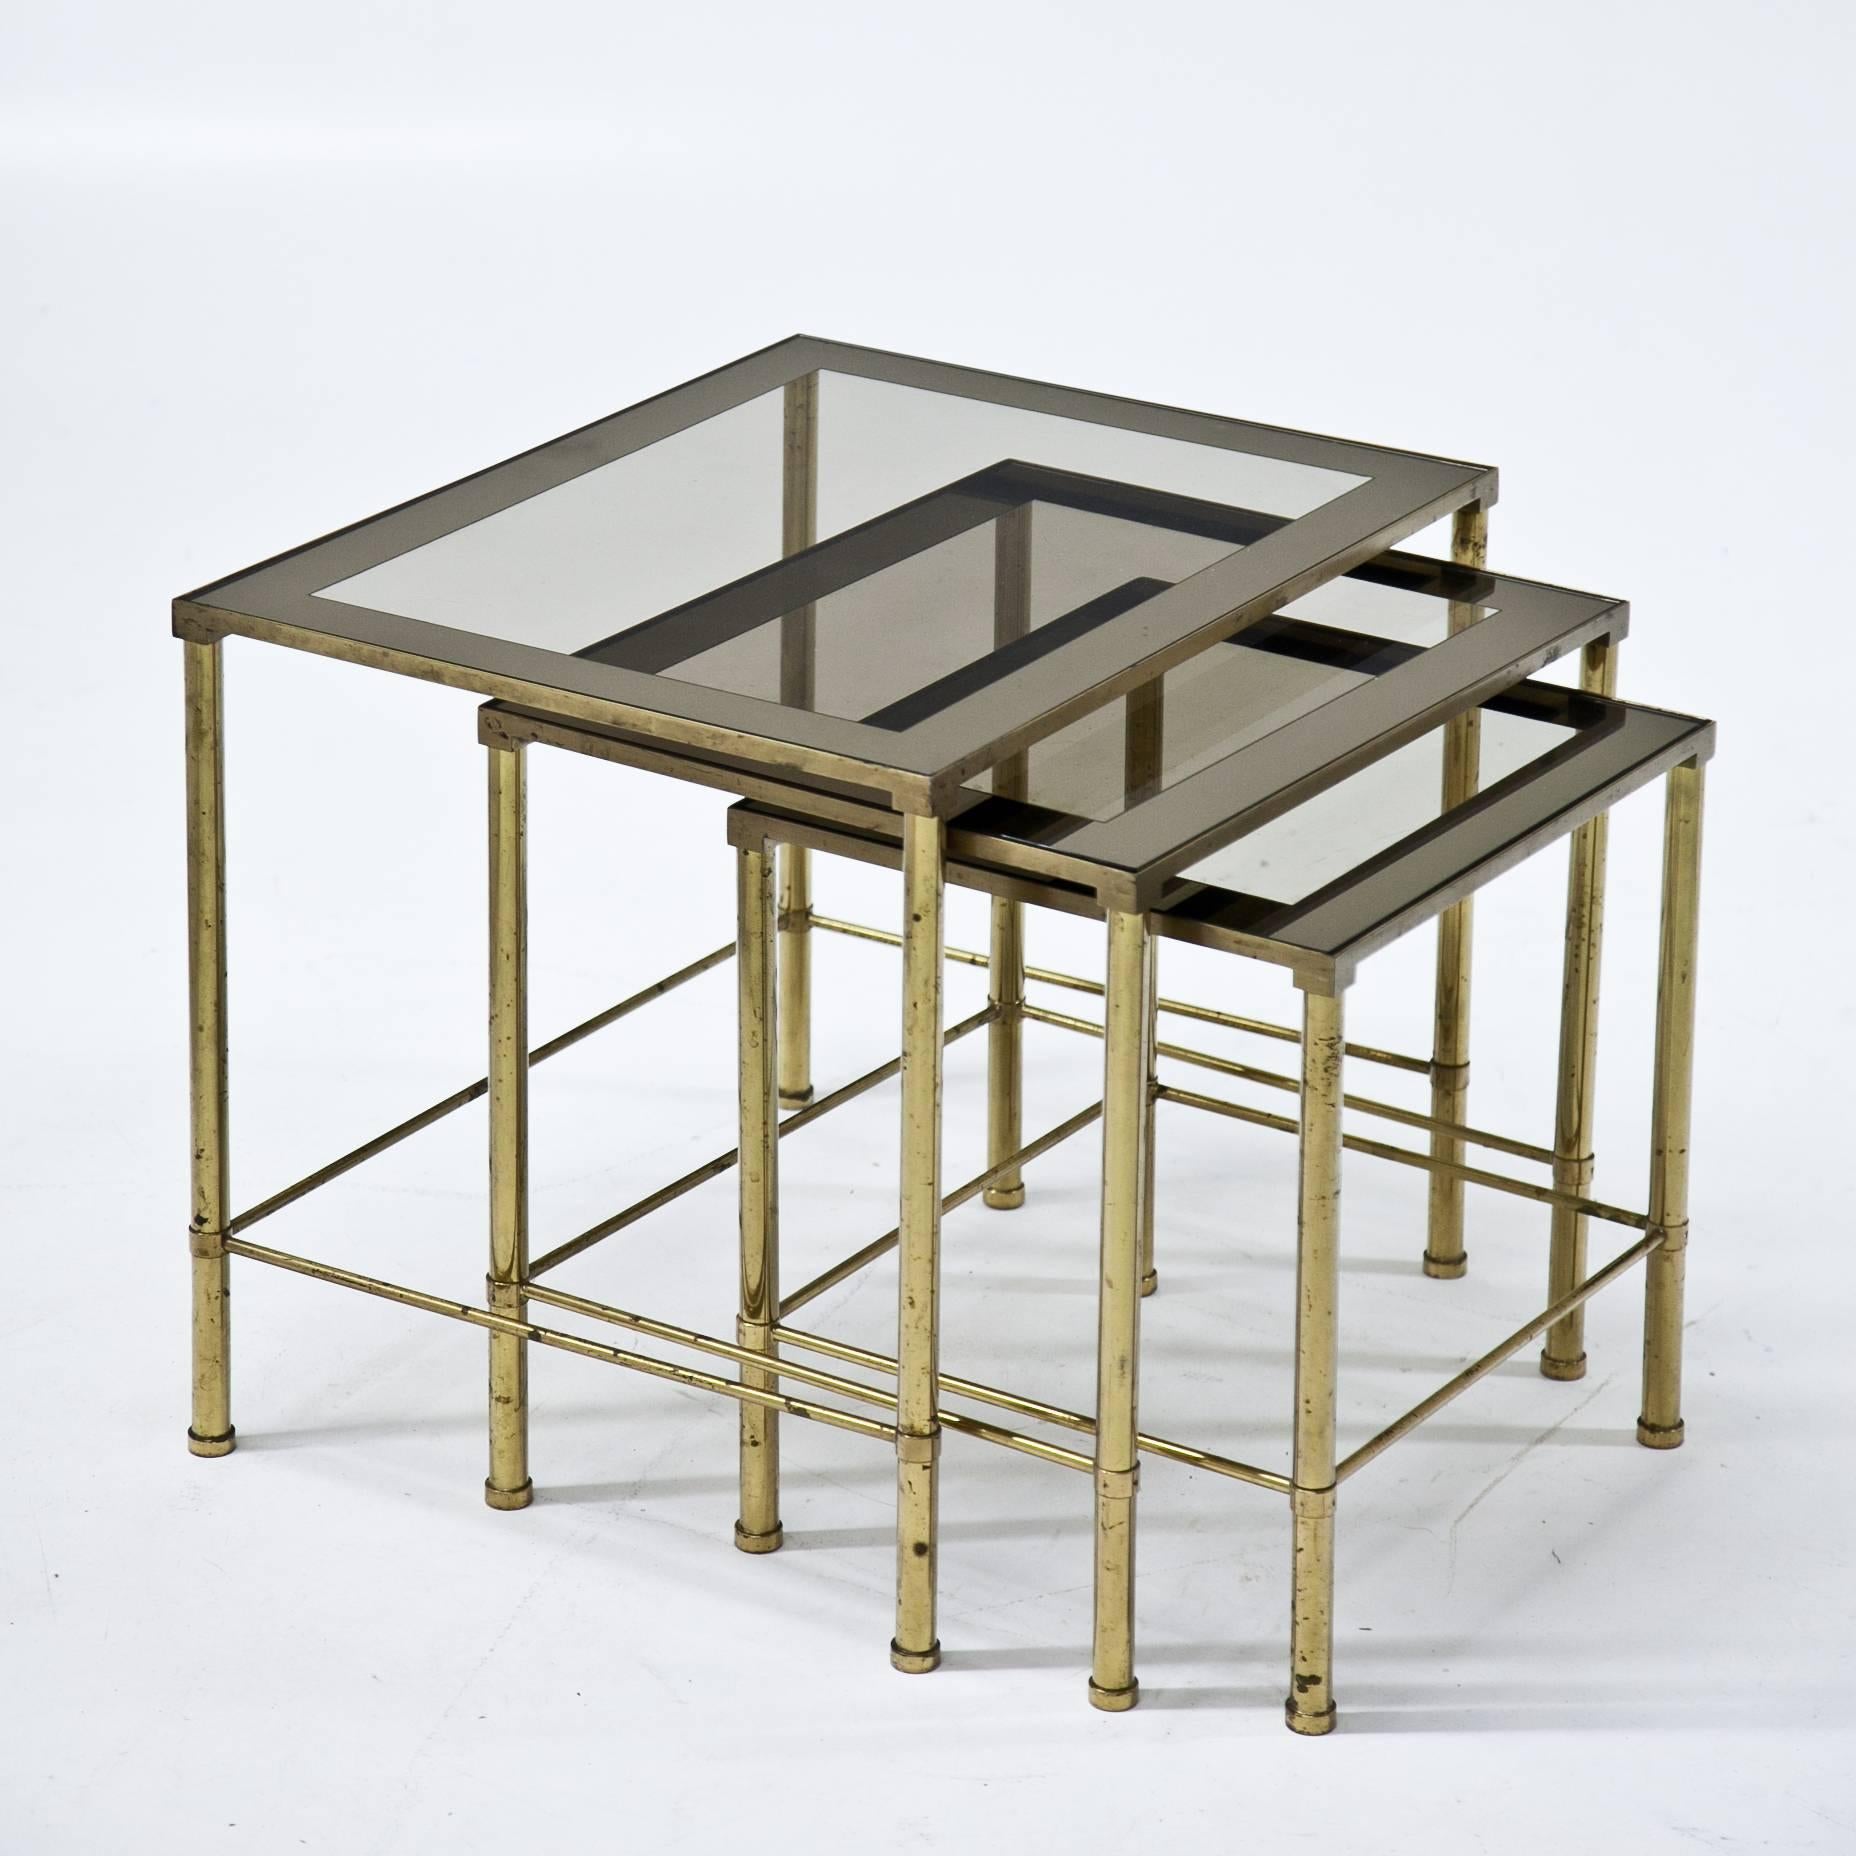 Italian Nesting tables with slightly tinted glass tops, standing on round brass feet.